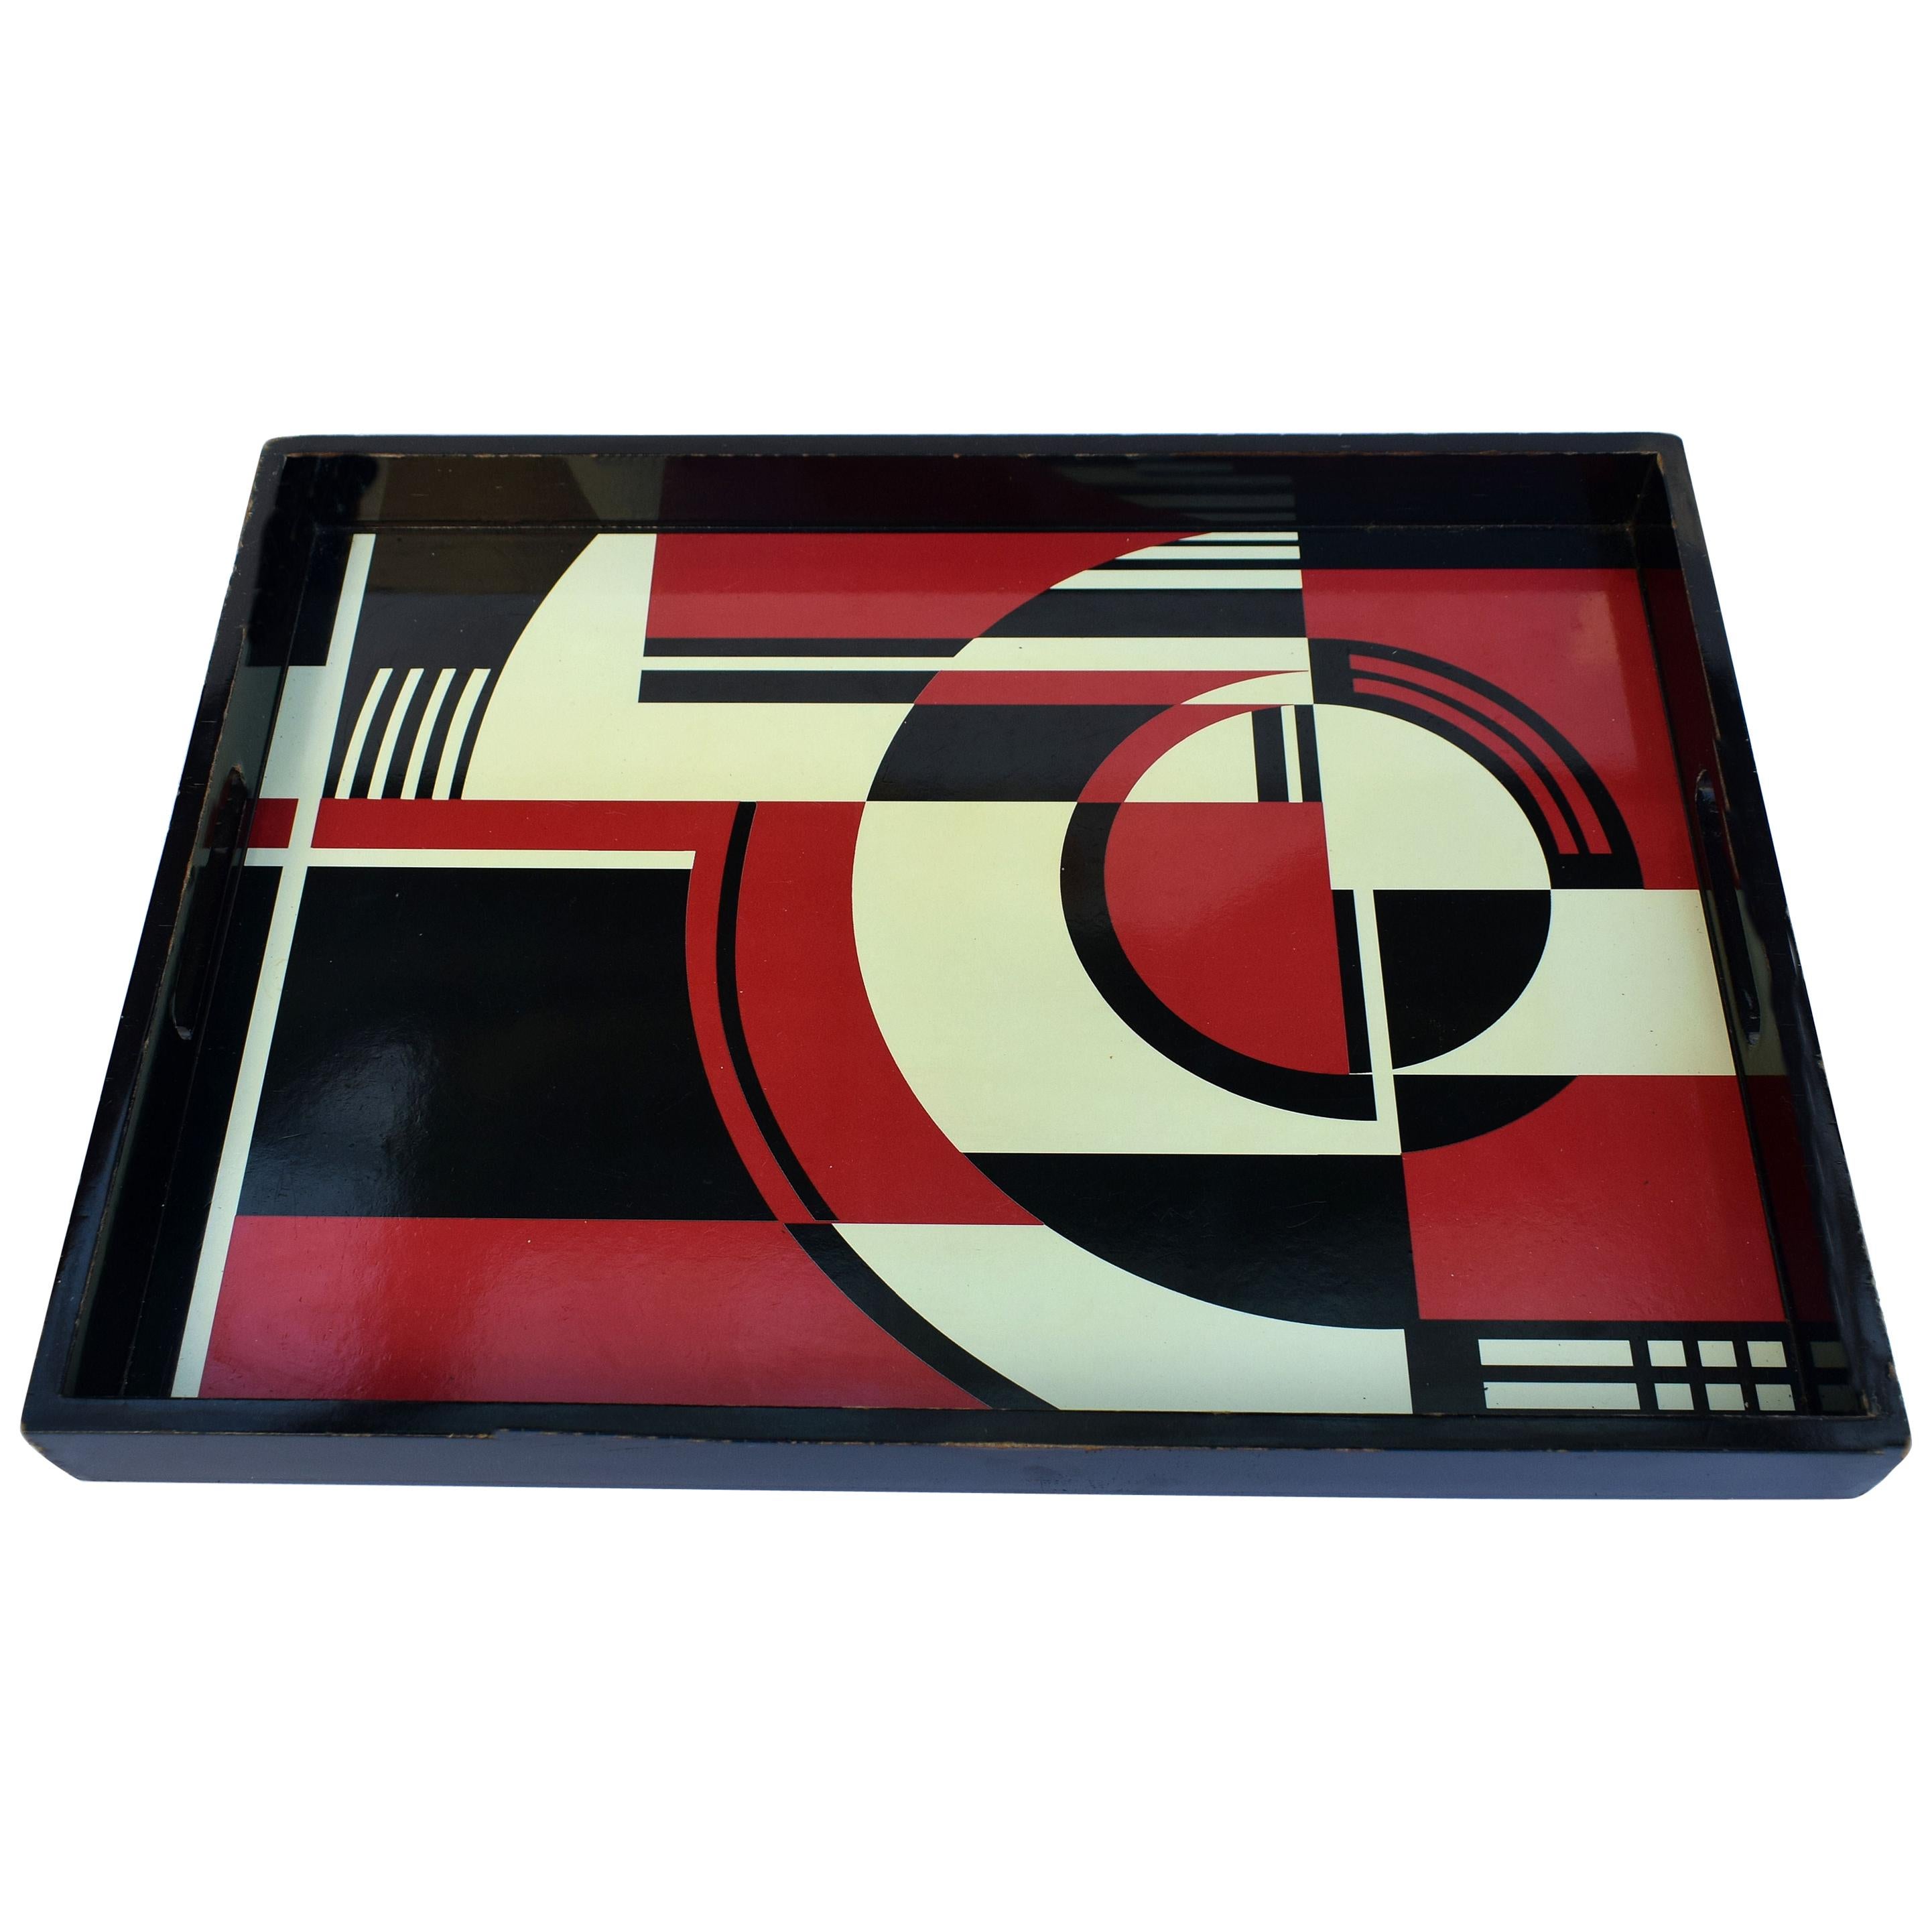 Large sized iconic Jazz era Art Deco cocktail serving tray dating to the 1930s. Highly decorative item with a fabulous geometric patterning. A truly rare find in exceptional condition, that any Art Deco connoisseur will appreciate.